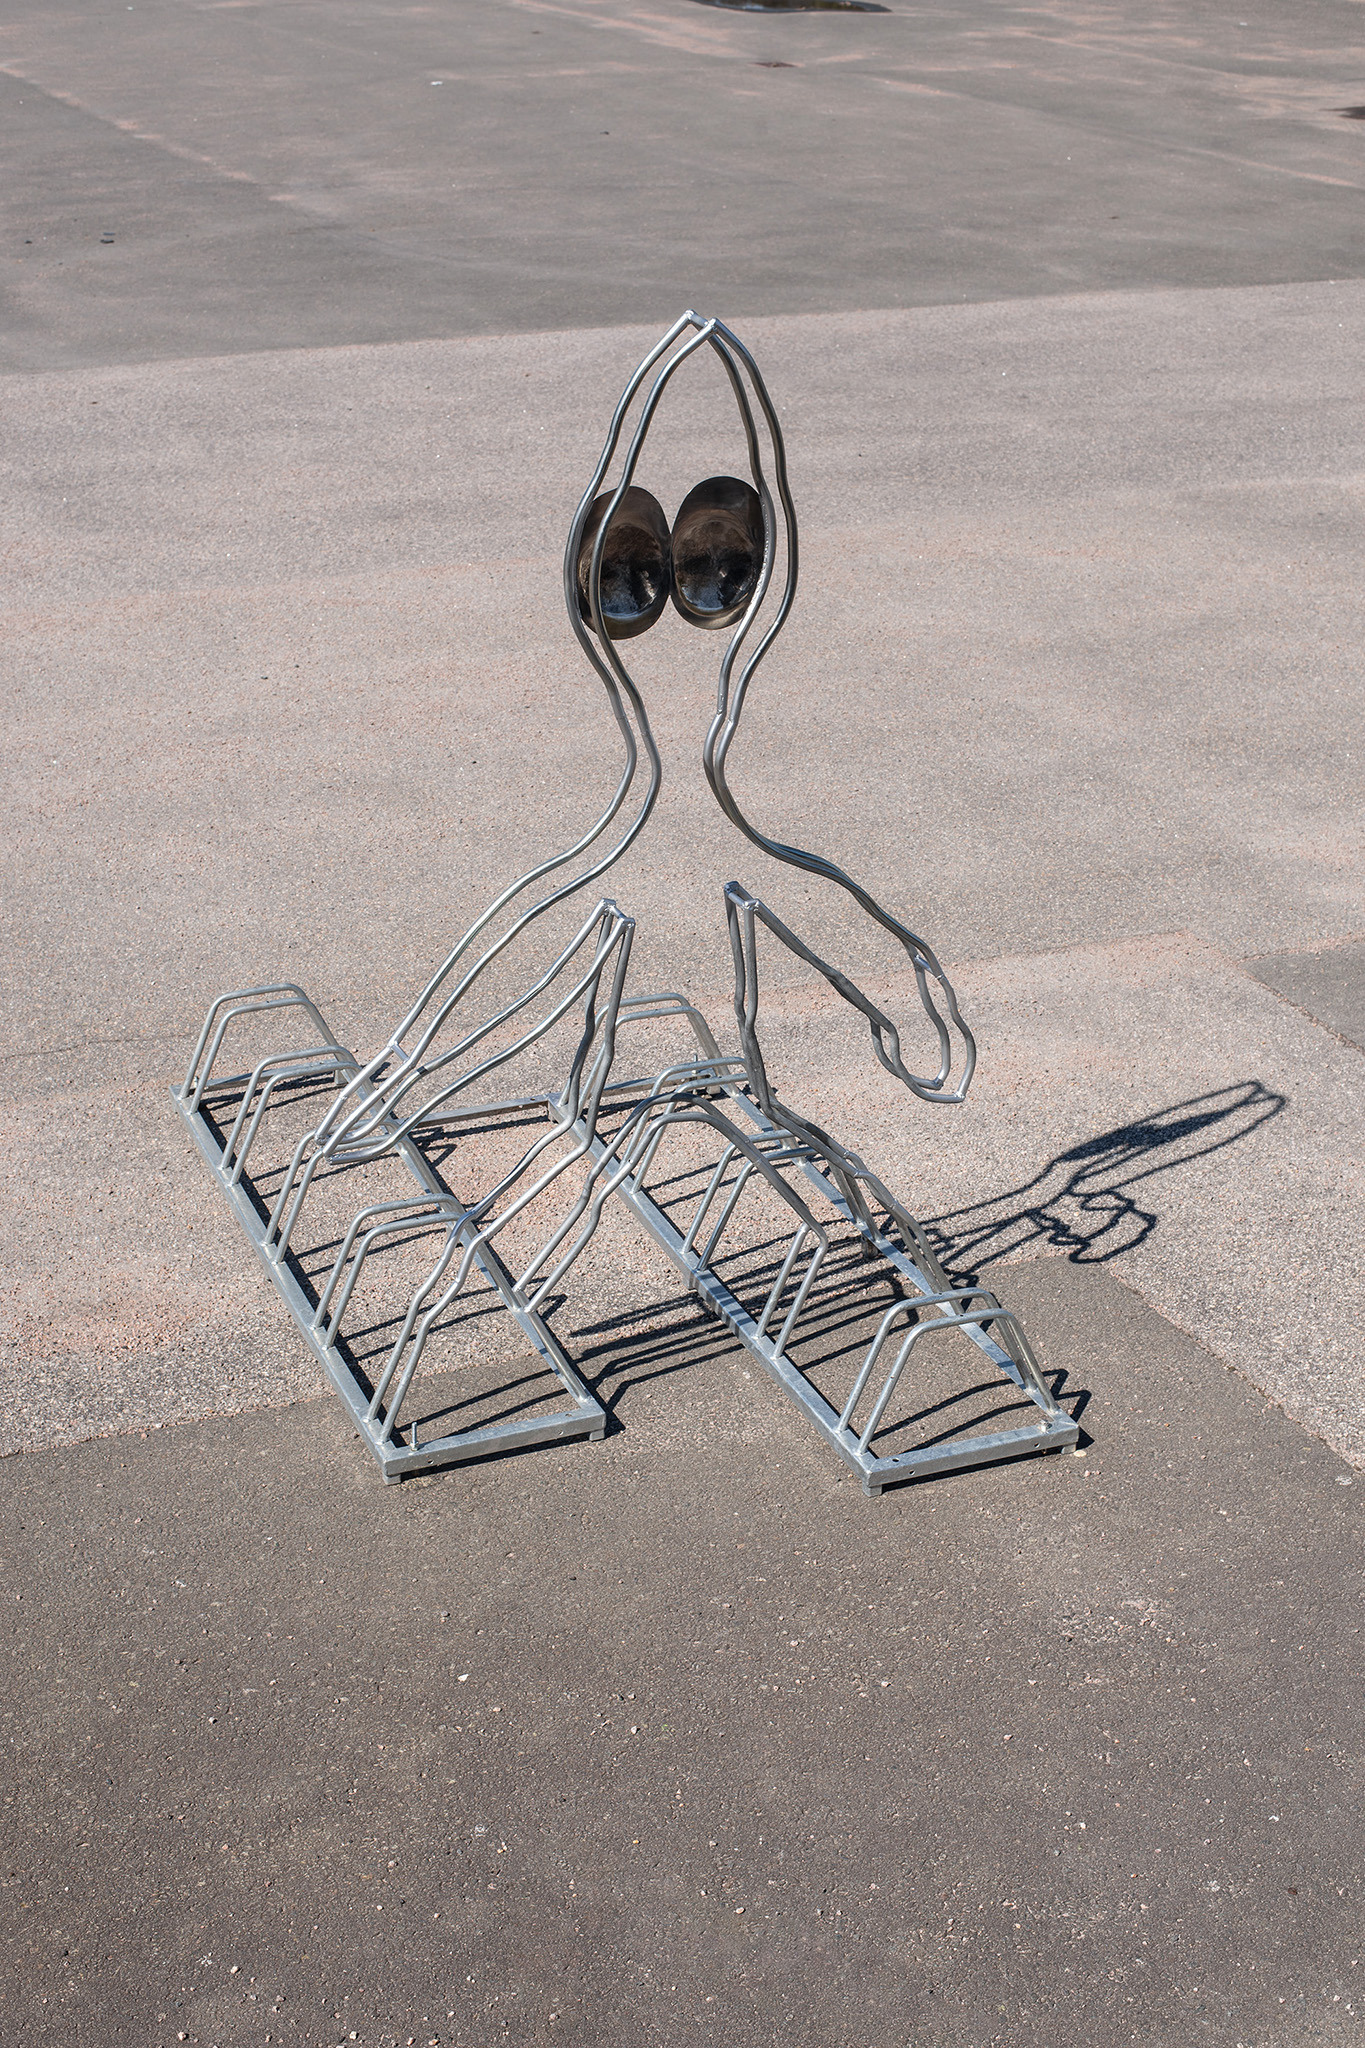  Matti Sumari, I Am Threshold, 2024, bicycle racks, stainless steel from an illegal catering operation